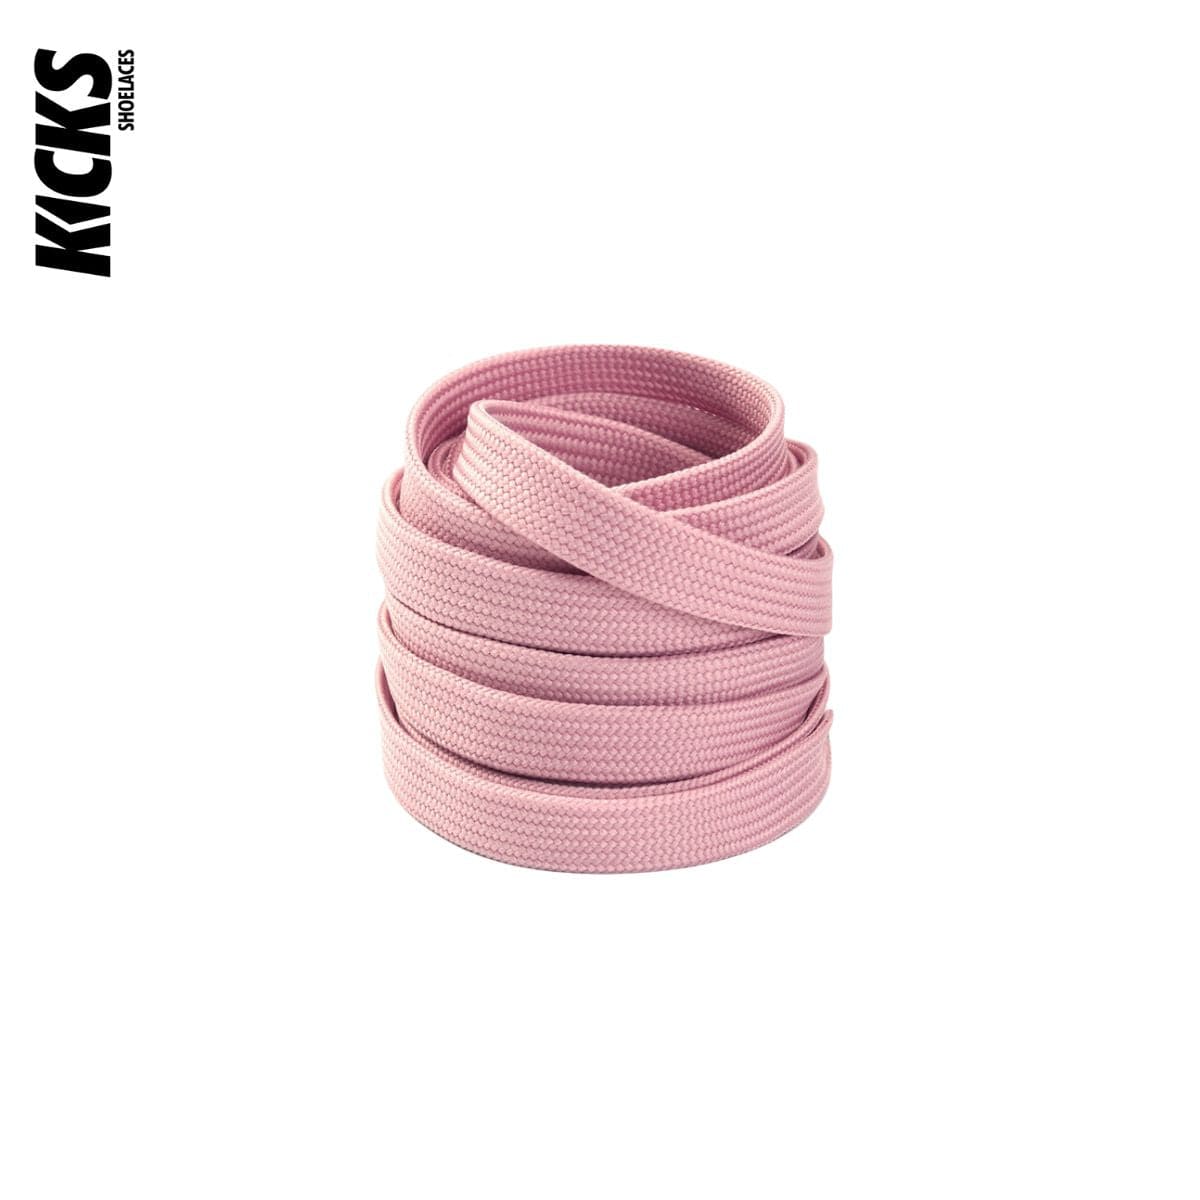 Blush Replacement Shoe Laces for Adidas NMD Sneakers by Kicks Shoelaces